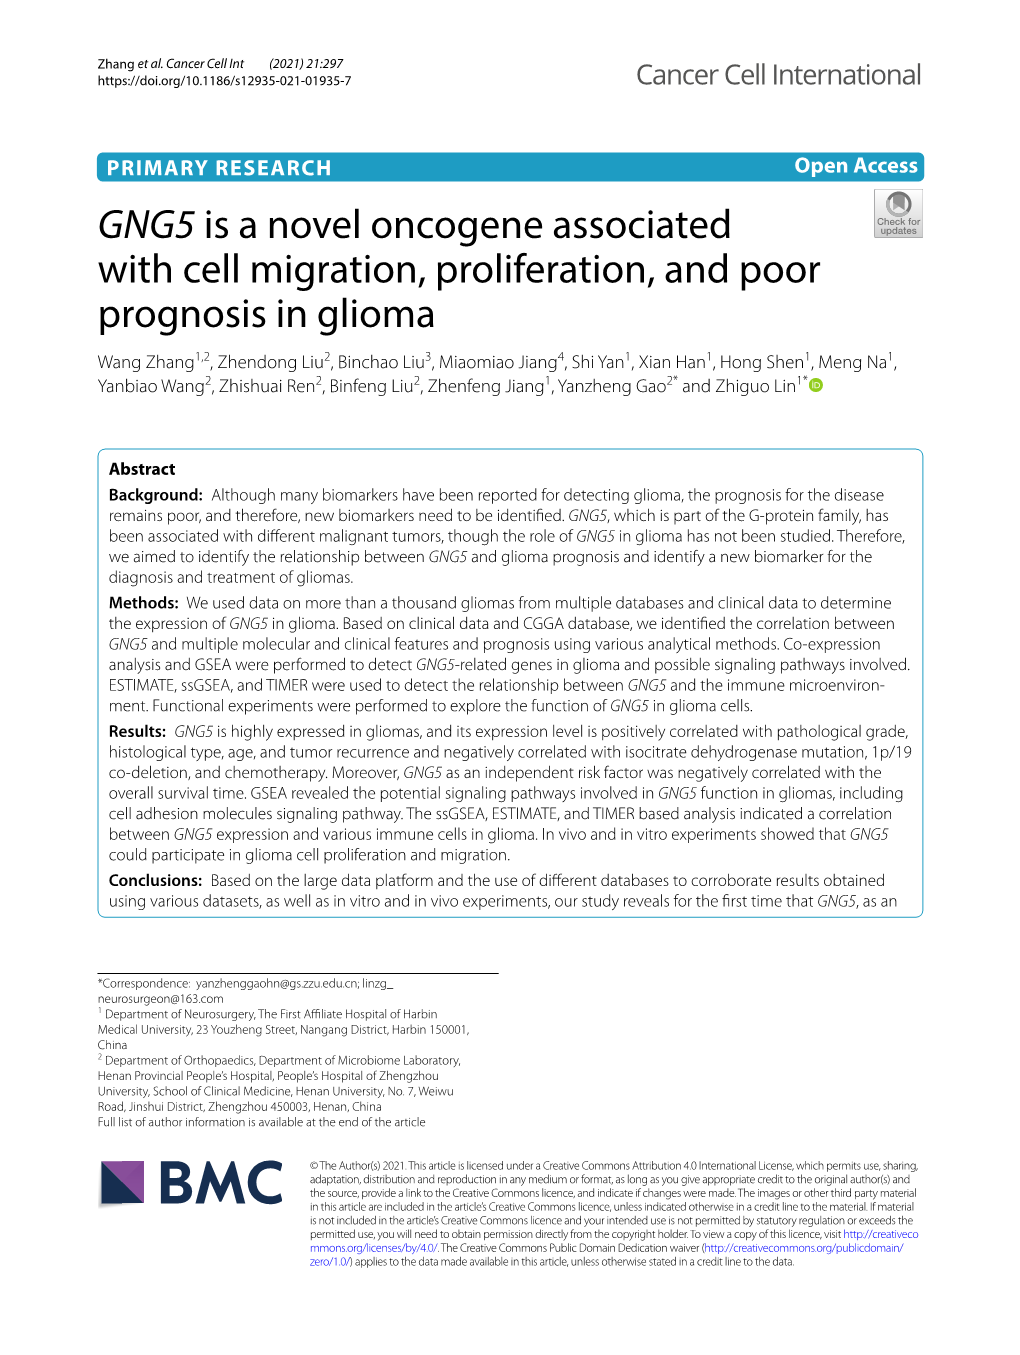 GNG5 Is a Novel Oncogene Associated with Cell Migration, Proliferation